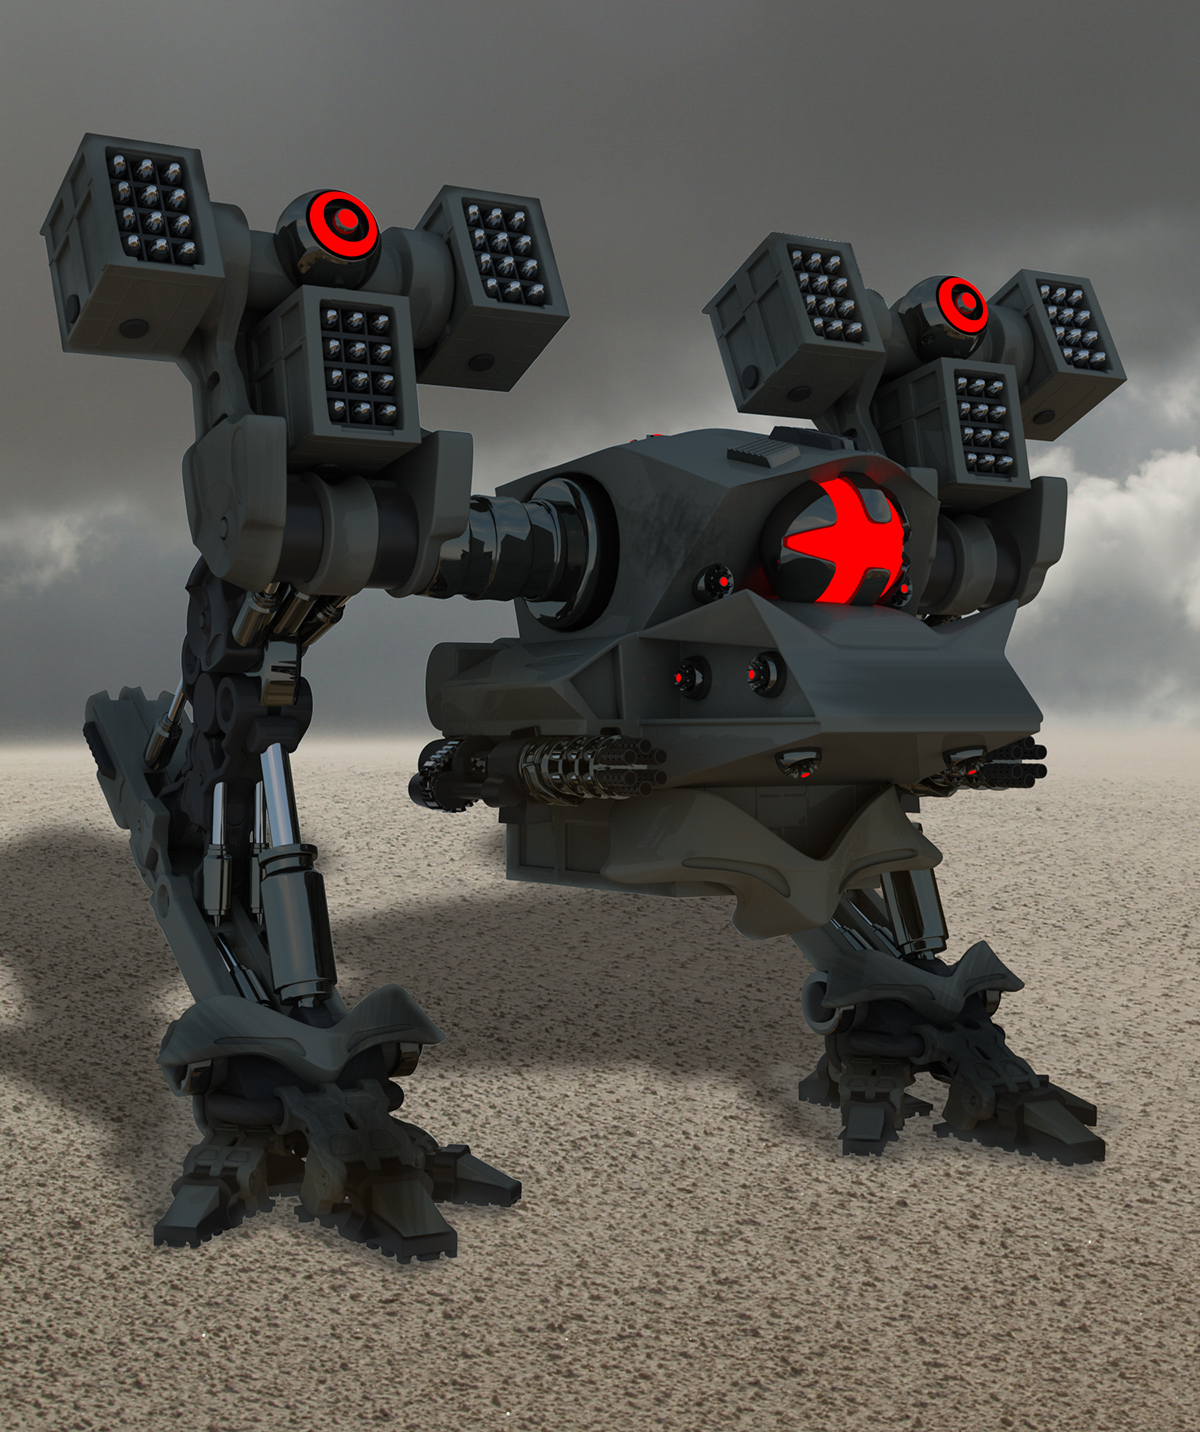 concept 3ds max 3D model robot game Iray walker drone tripod